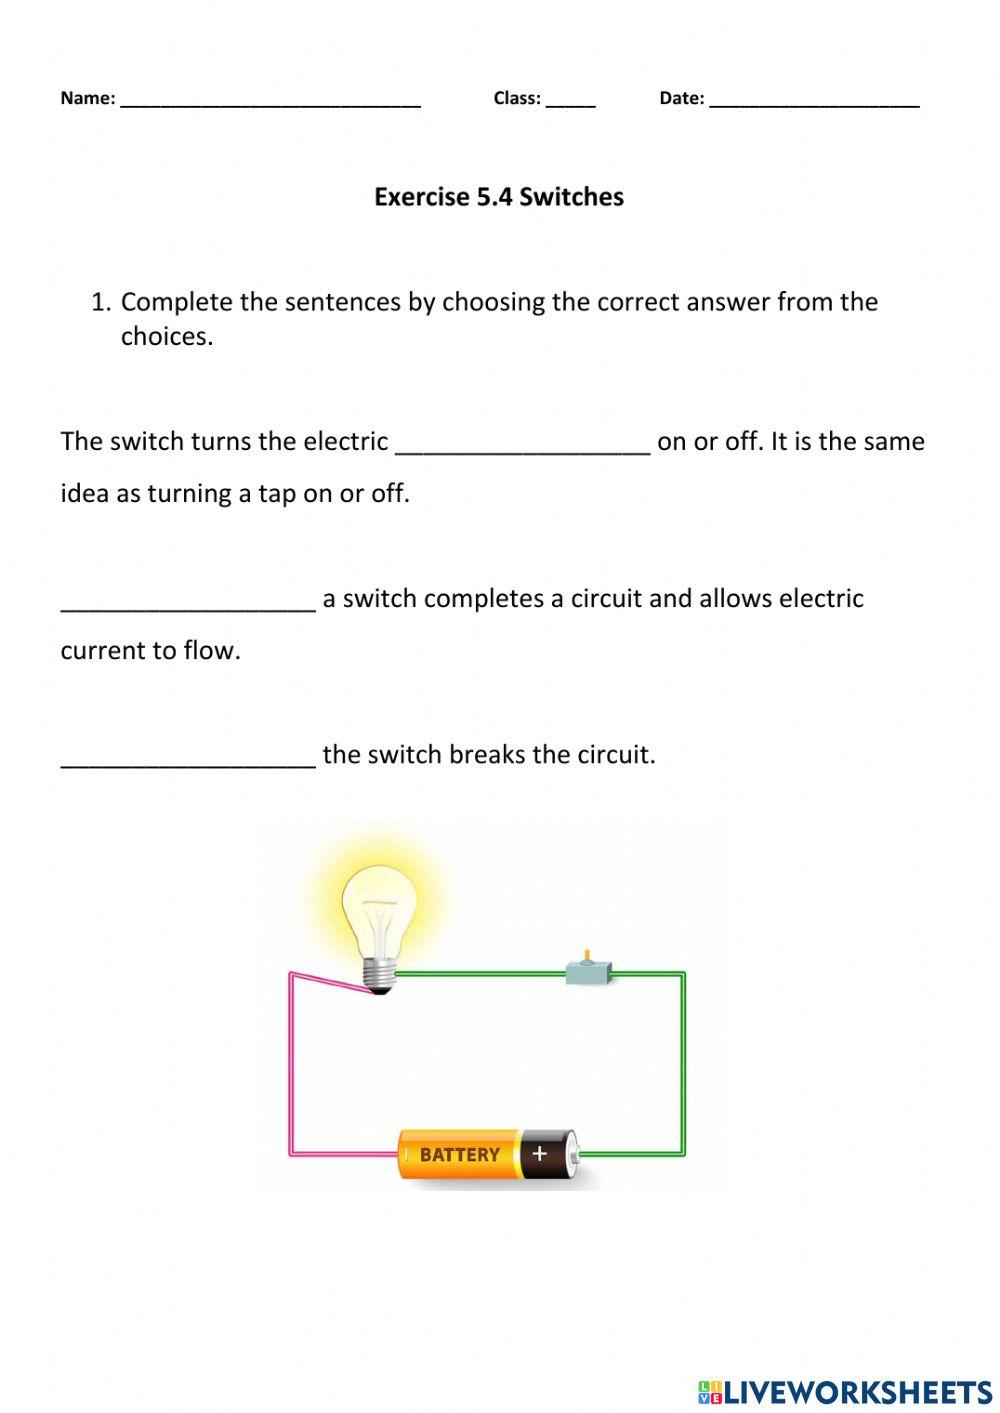 Exercise 5.4 Switches